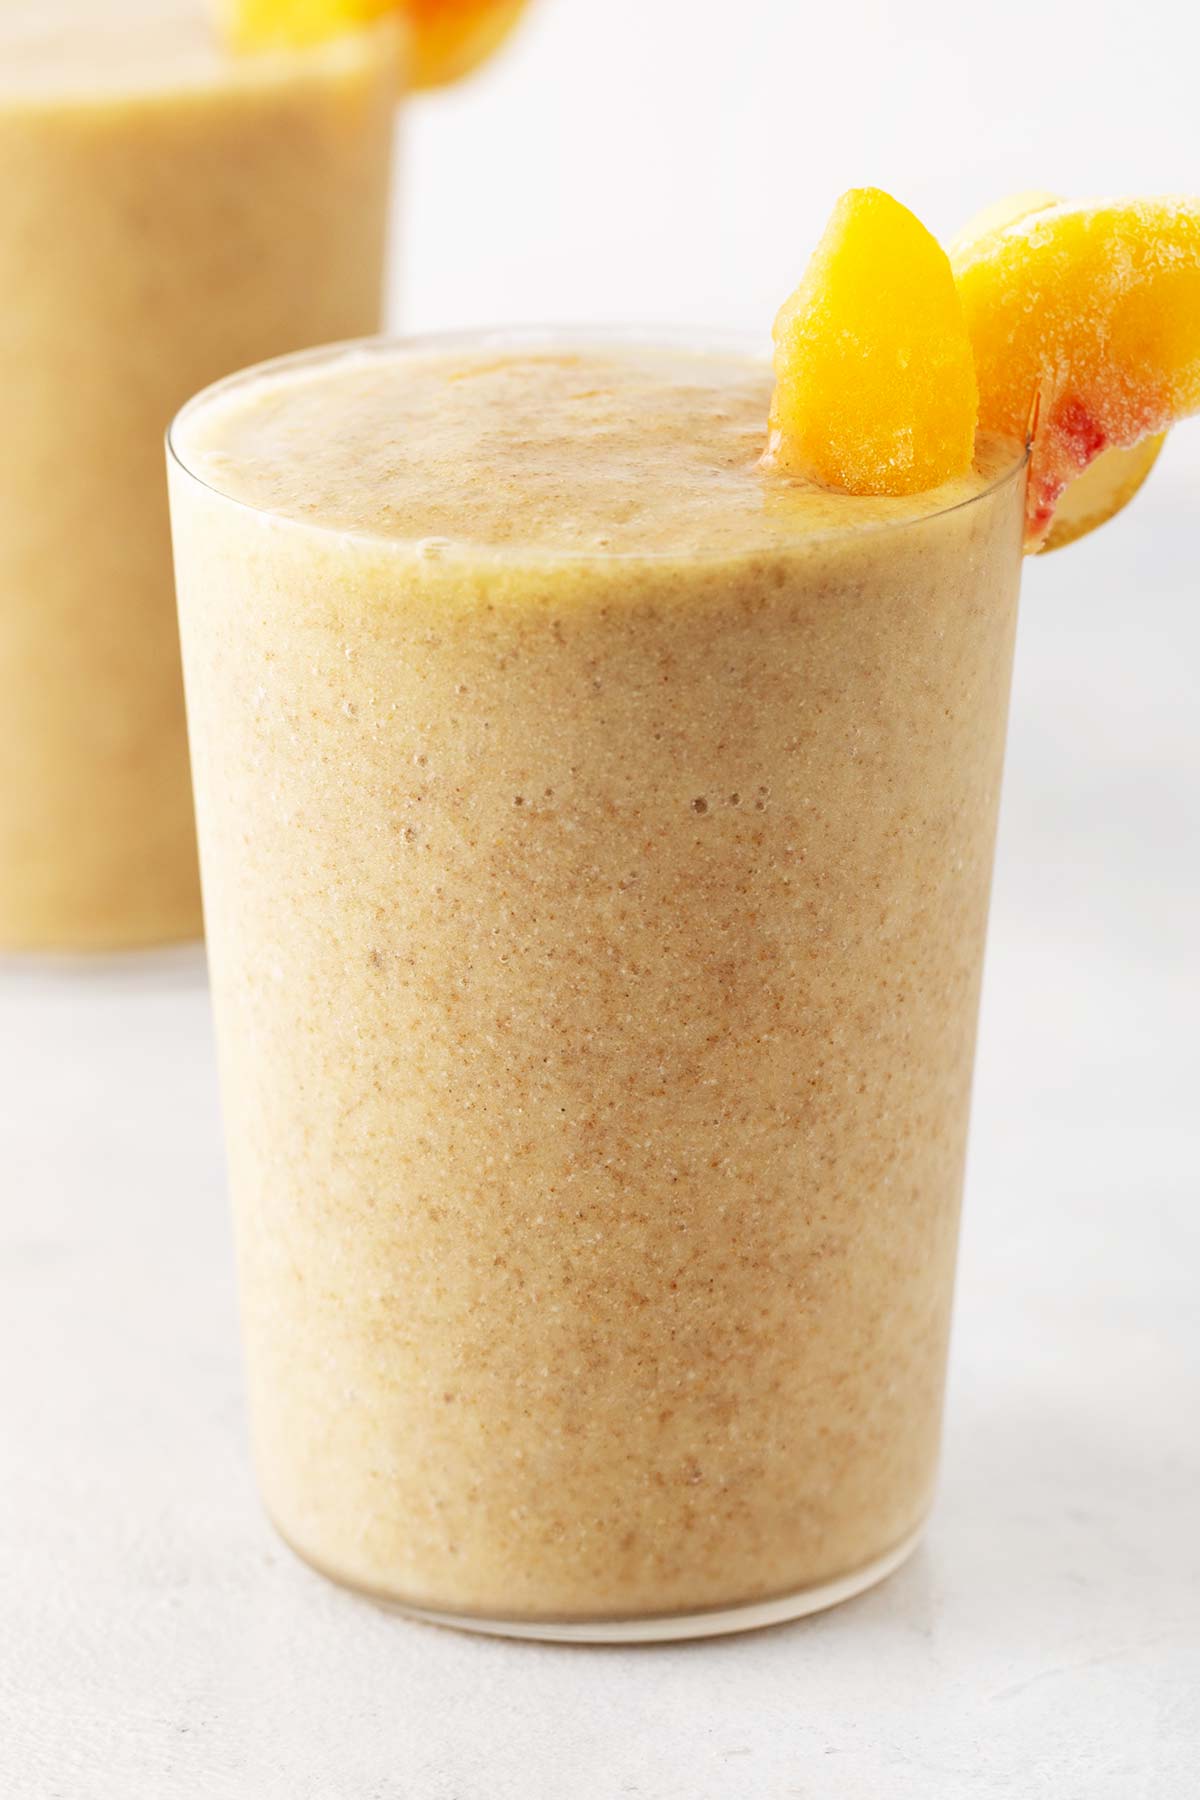 Peach smoothie in a glass.